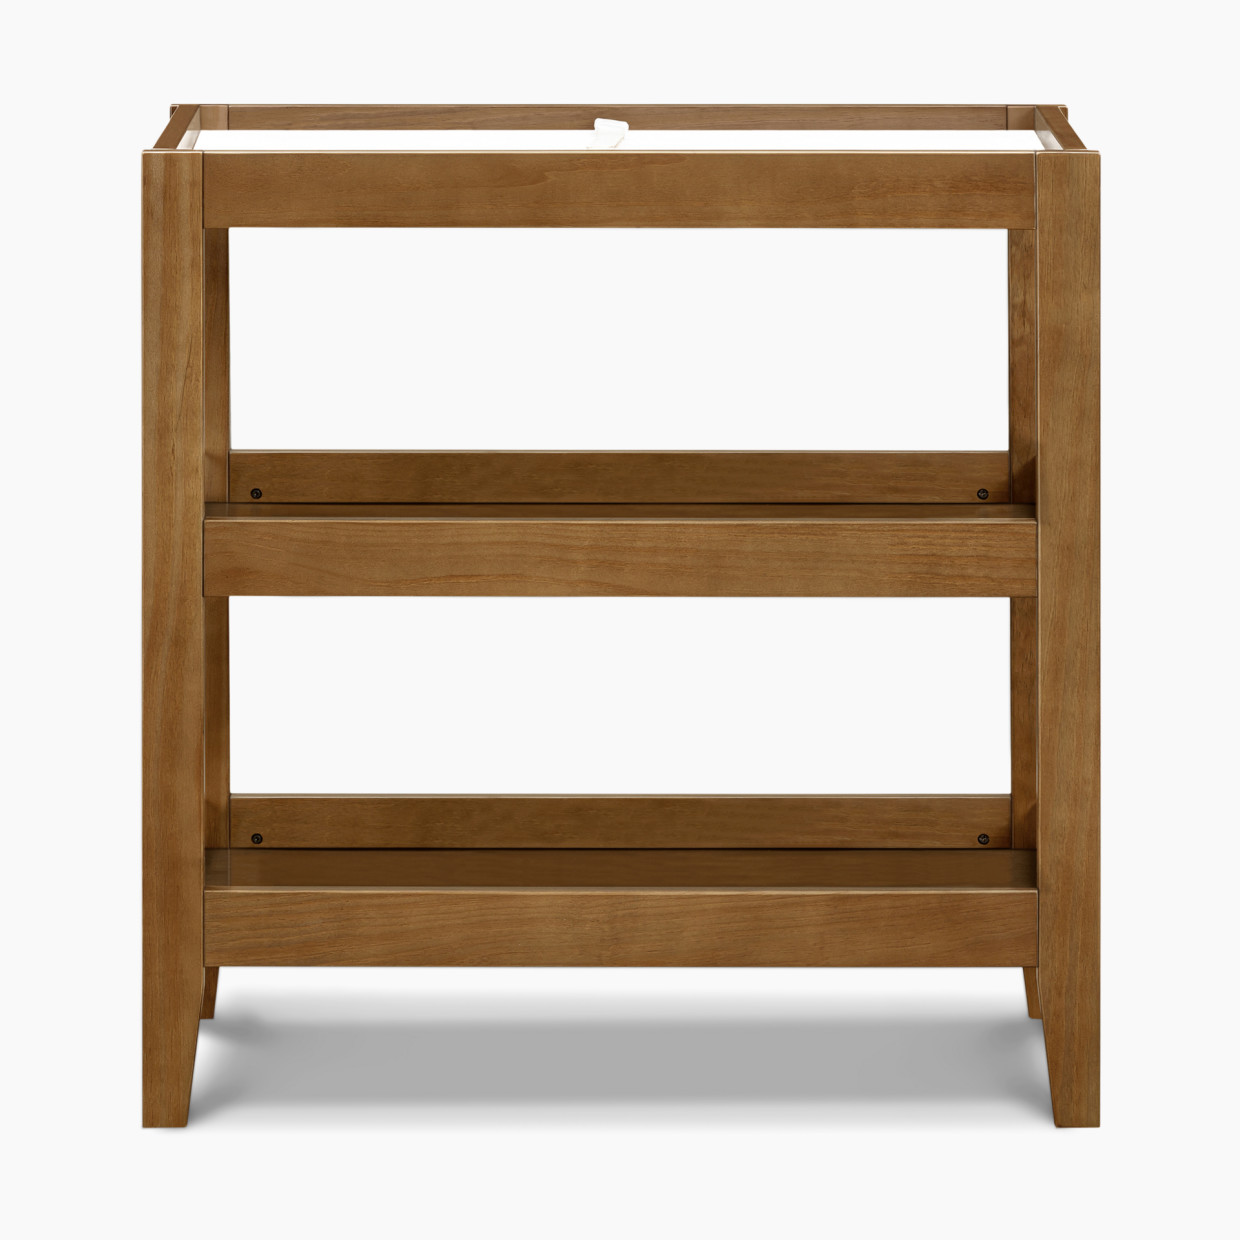 Carter's by DaVinci Colby Changing Table - Walnut.